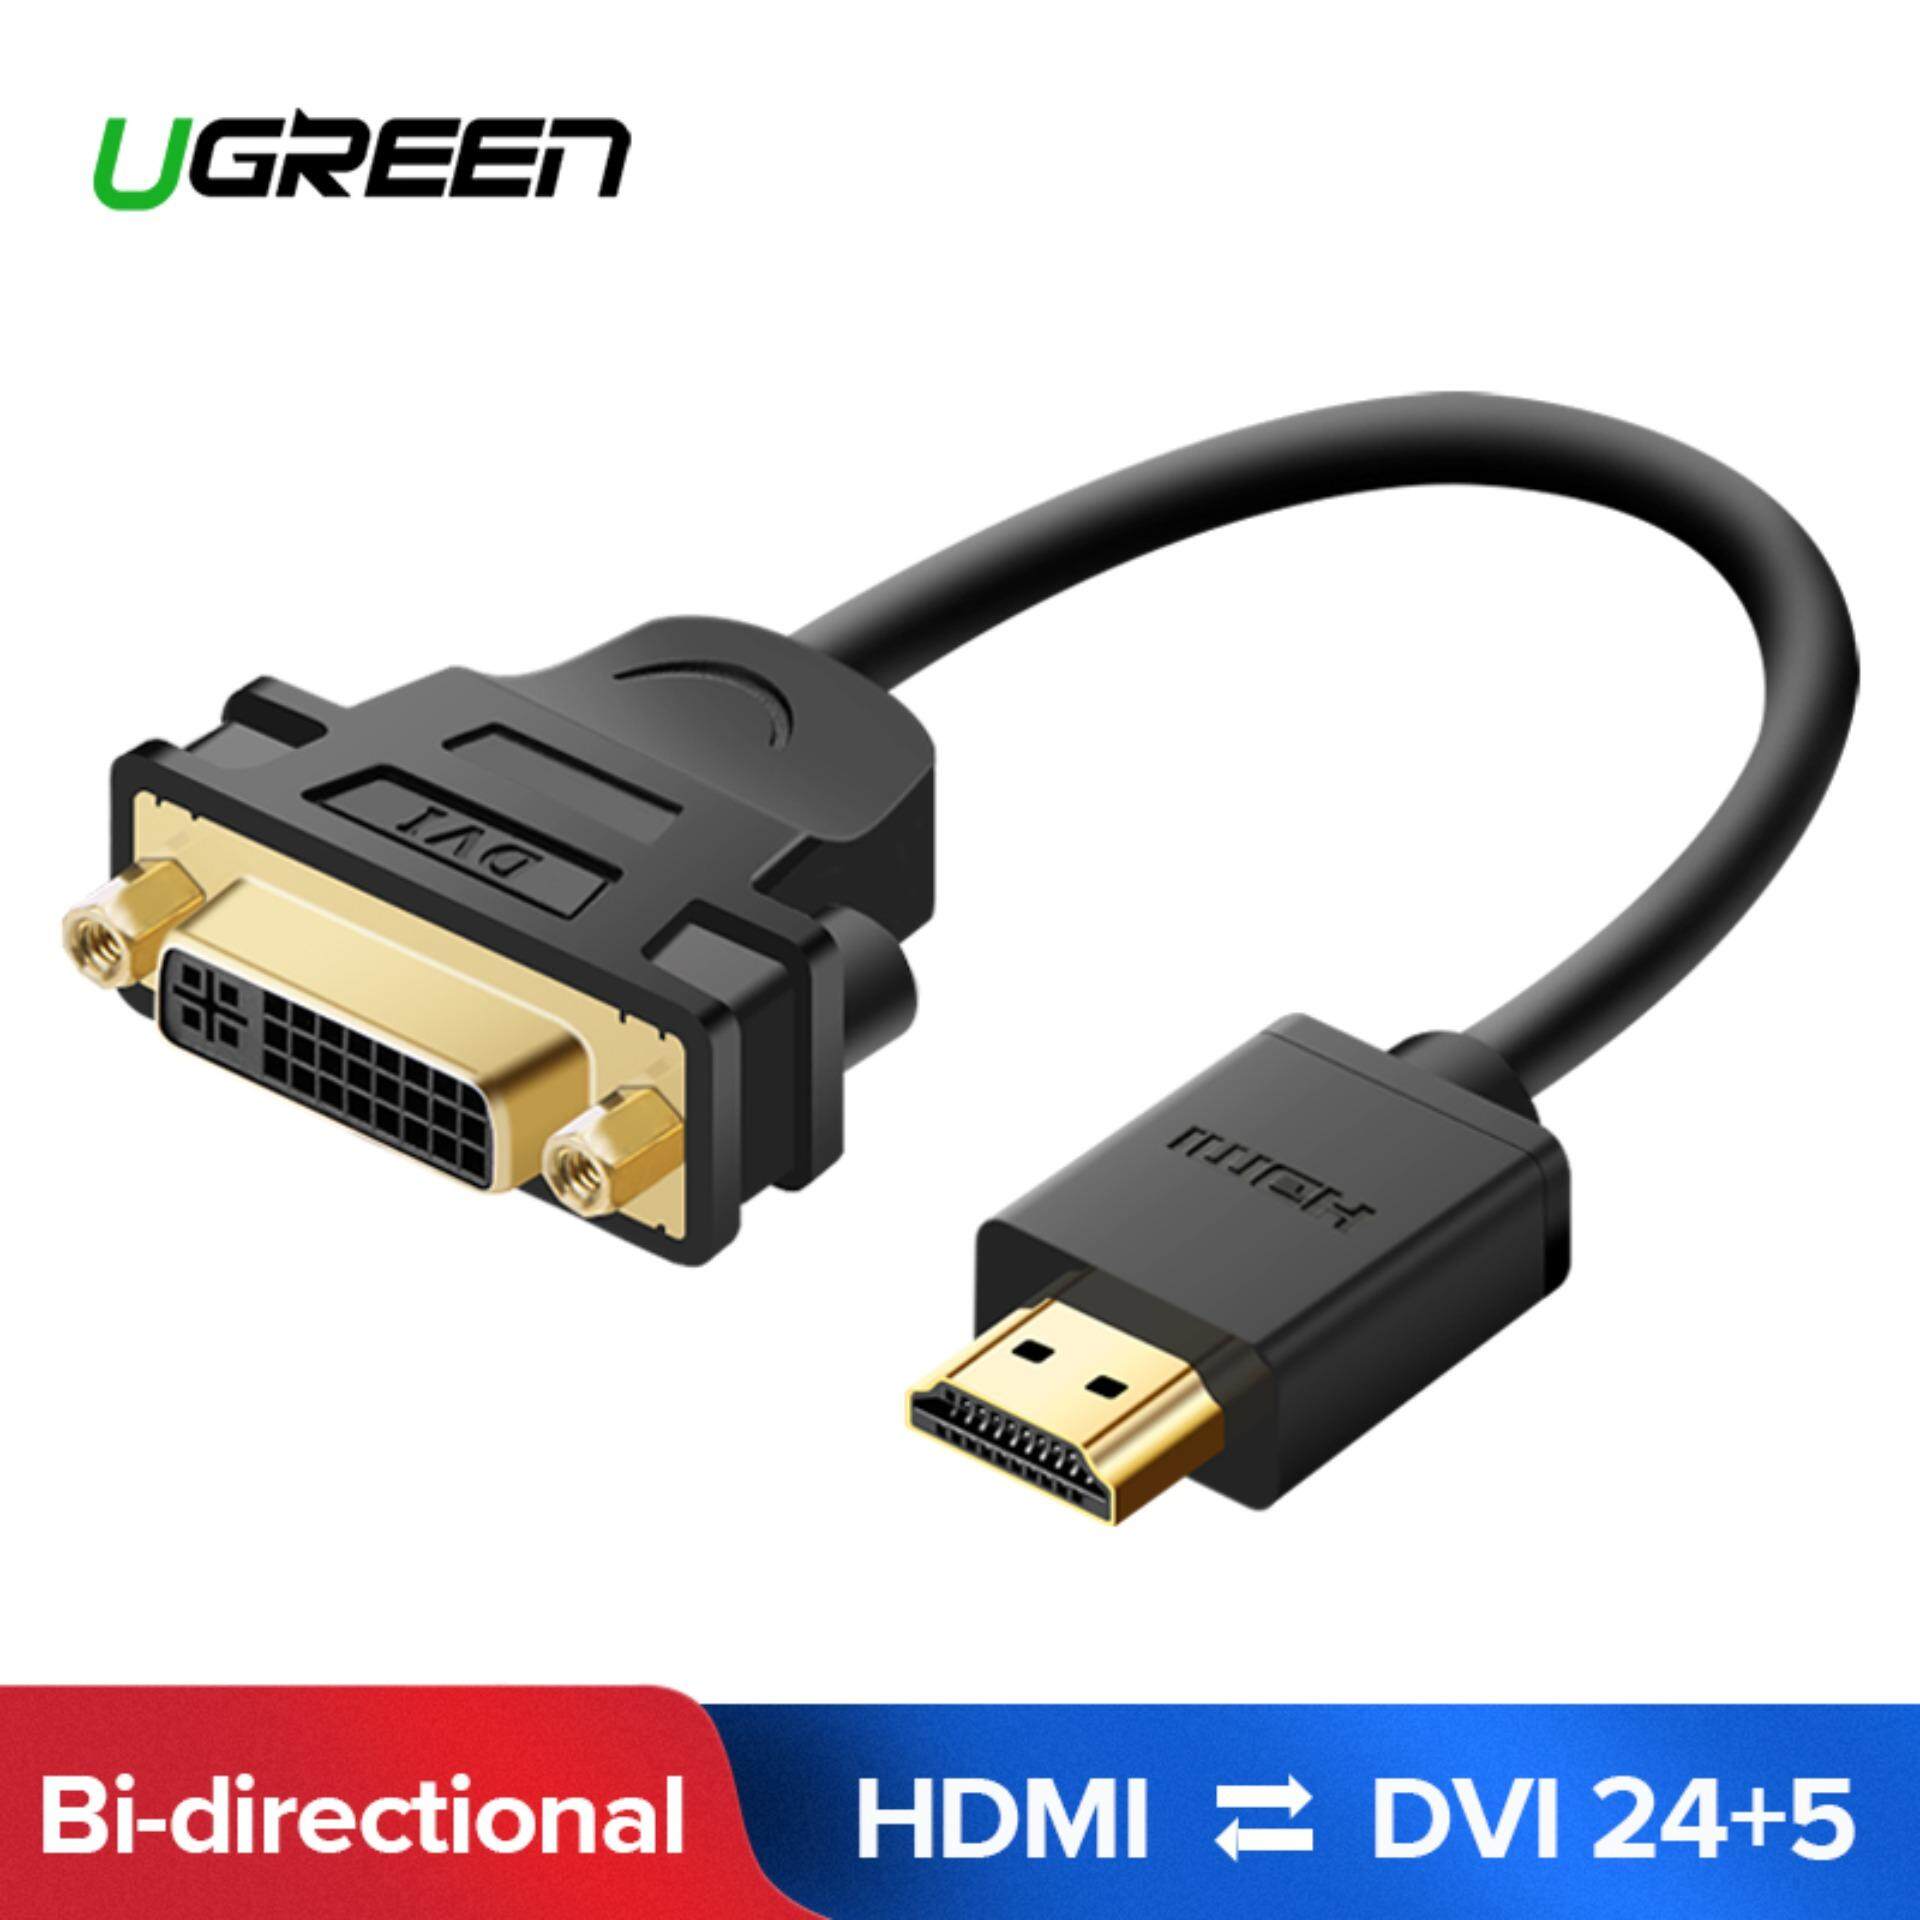 UGREEN High Speed HDMI Male to DVI 24+5 Female Adapter Cable